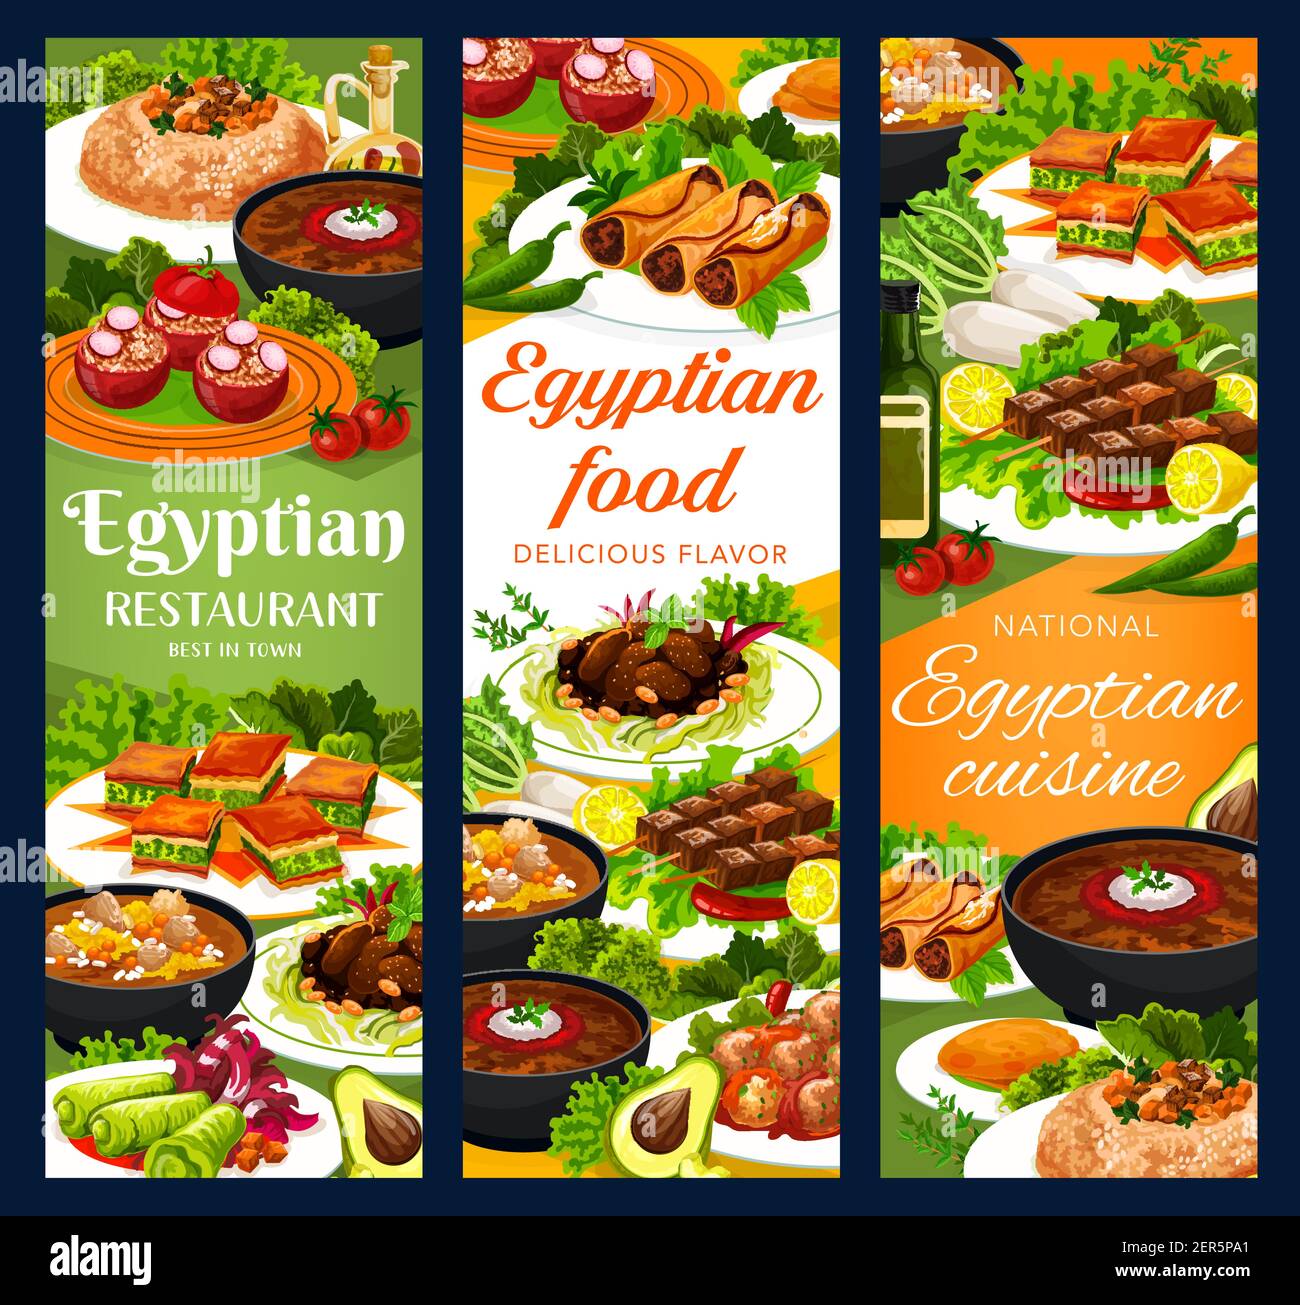 Egyptian cuisine restaurant meals vector banners. Sardine patties, stuffed tomatoes, cabbage and rolls, shish kebabs with saffron, lentil and trotter Stock Vector